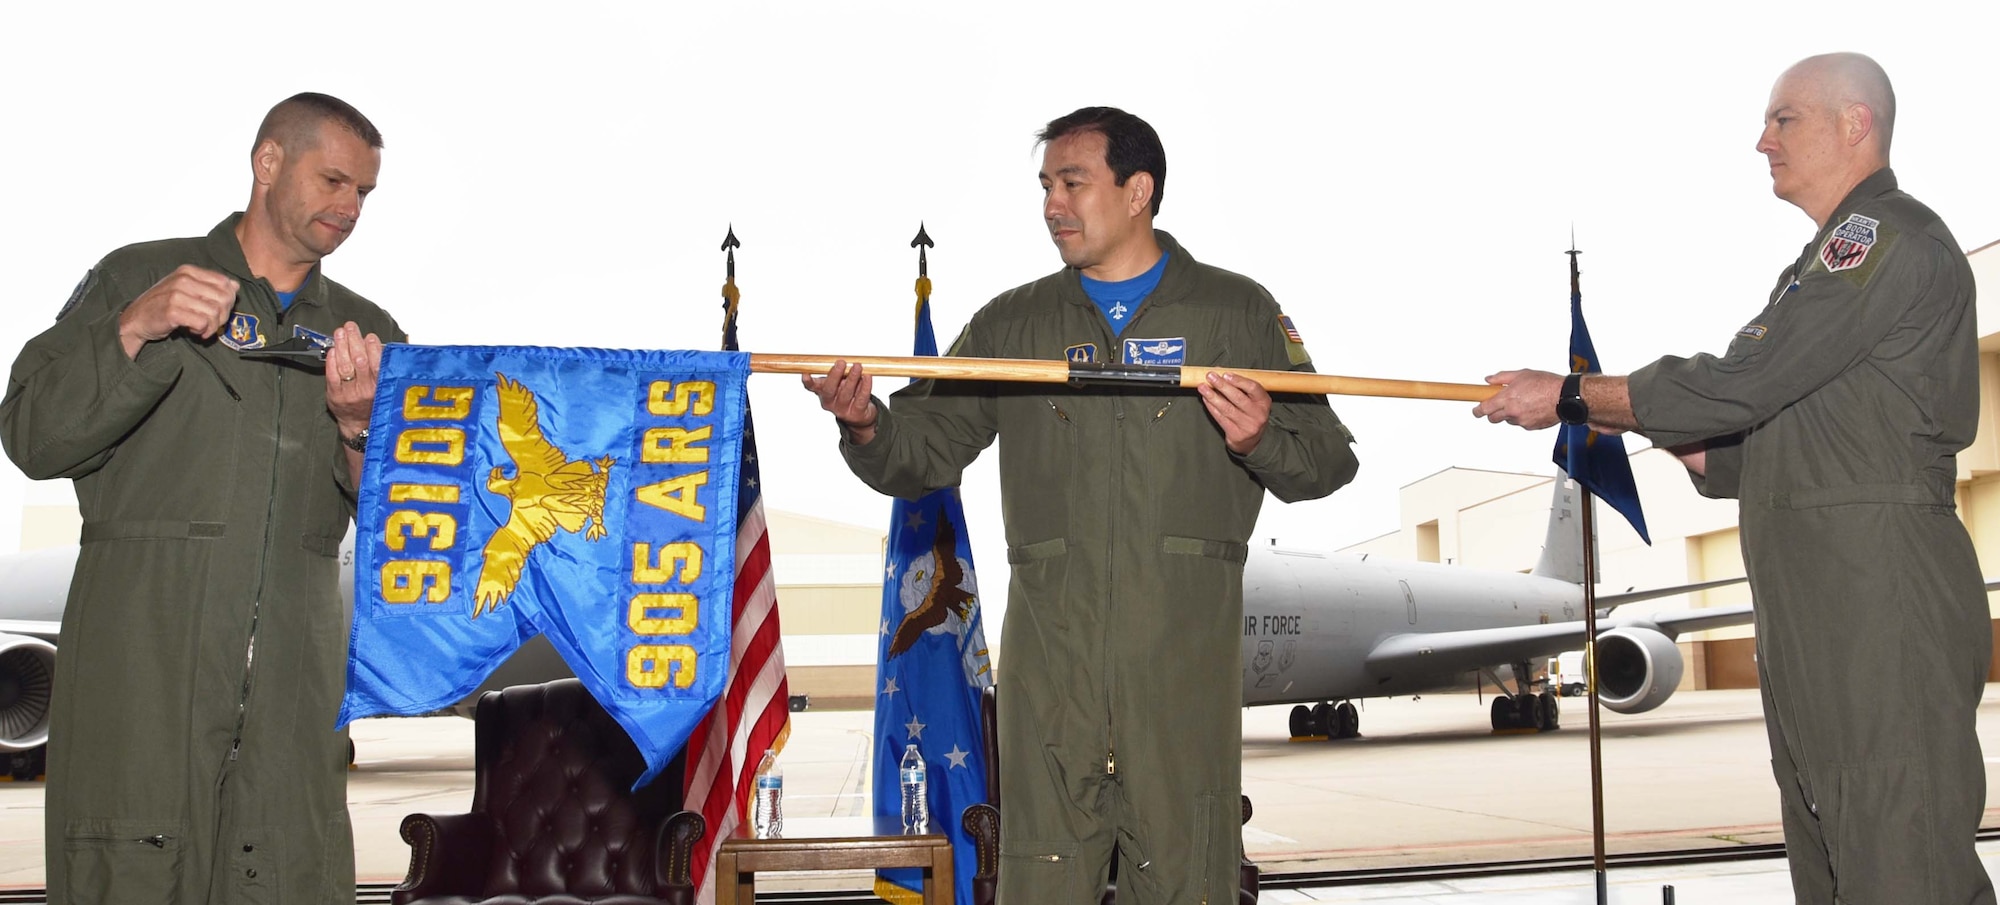 (Left to right) Col. Phil Heseltine, 931st Air Refueling Wing commander, Lt. Col. Eric Rivero, the incoming 905th Air Refueling Squadron commander, and retired Col. Noel Bradford, the previous commander of the 905 ARS, unfurl the 905 ARS guidon during an official ceremony, May 4, 2019, McConnell Air Force Base, Kan. The 905 ARS was the first Air Force flying unit to be assigned to Grand Forks, and it received its first KC-135 Stratotanker in 1960.  The unit stayed at Grand Forks Air Force Base, N.D., until it was deactivated in 2010.